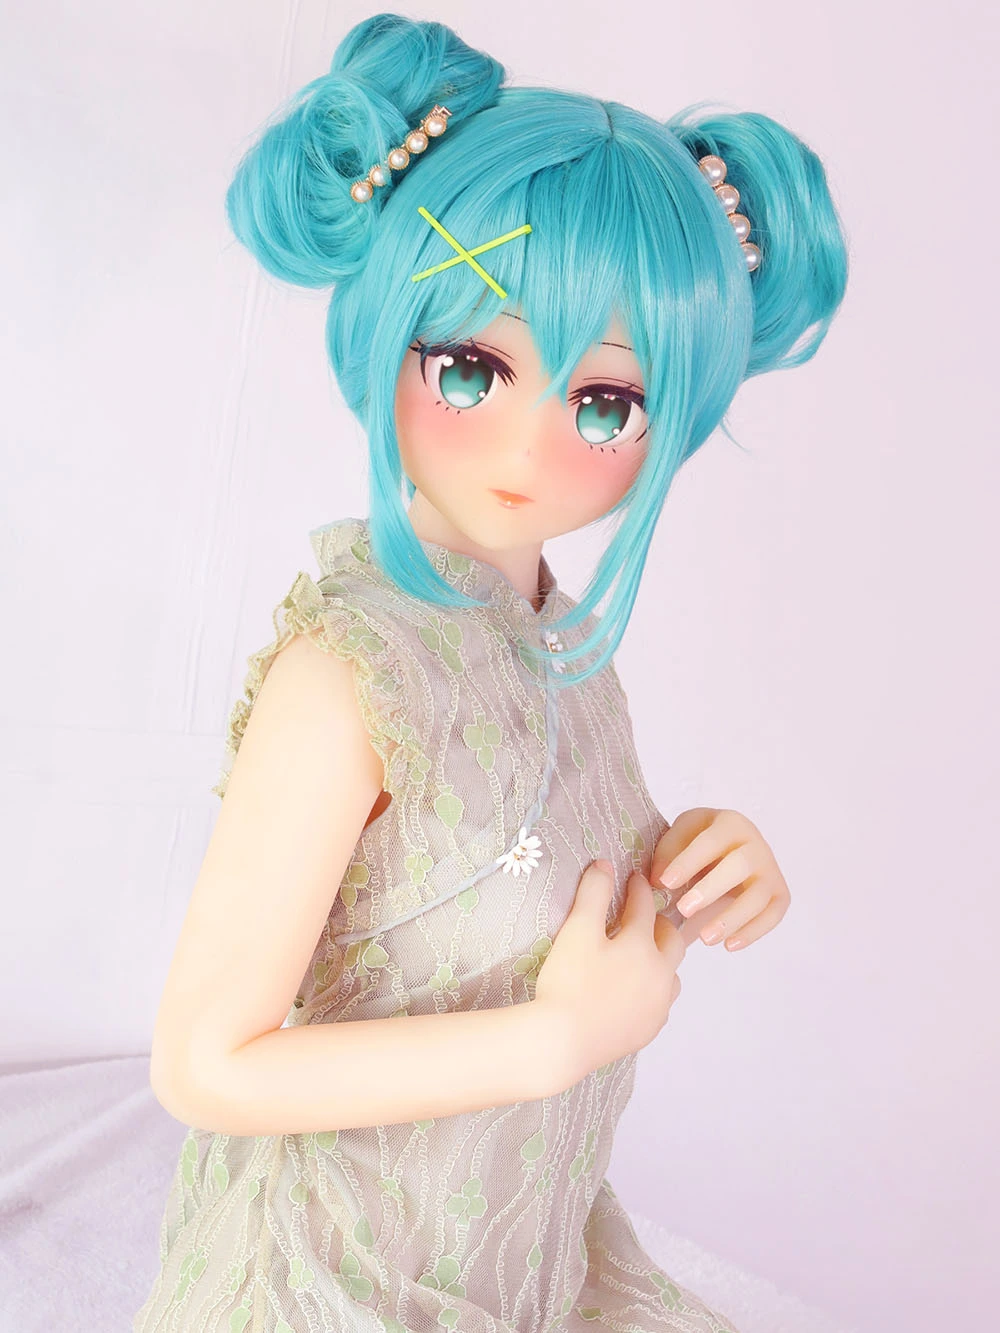 hatsune miku doll From Aotume